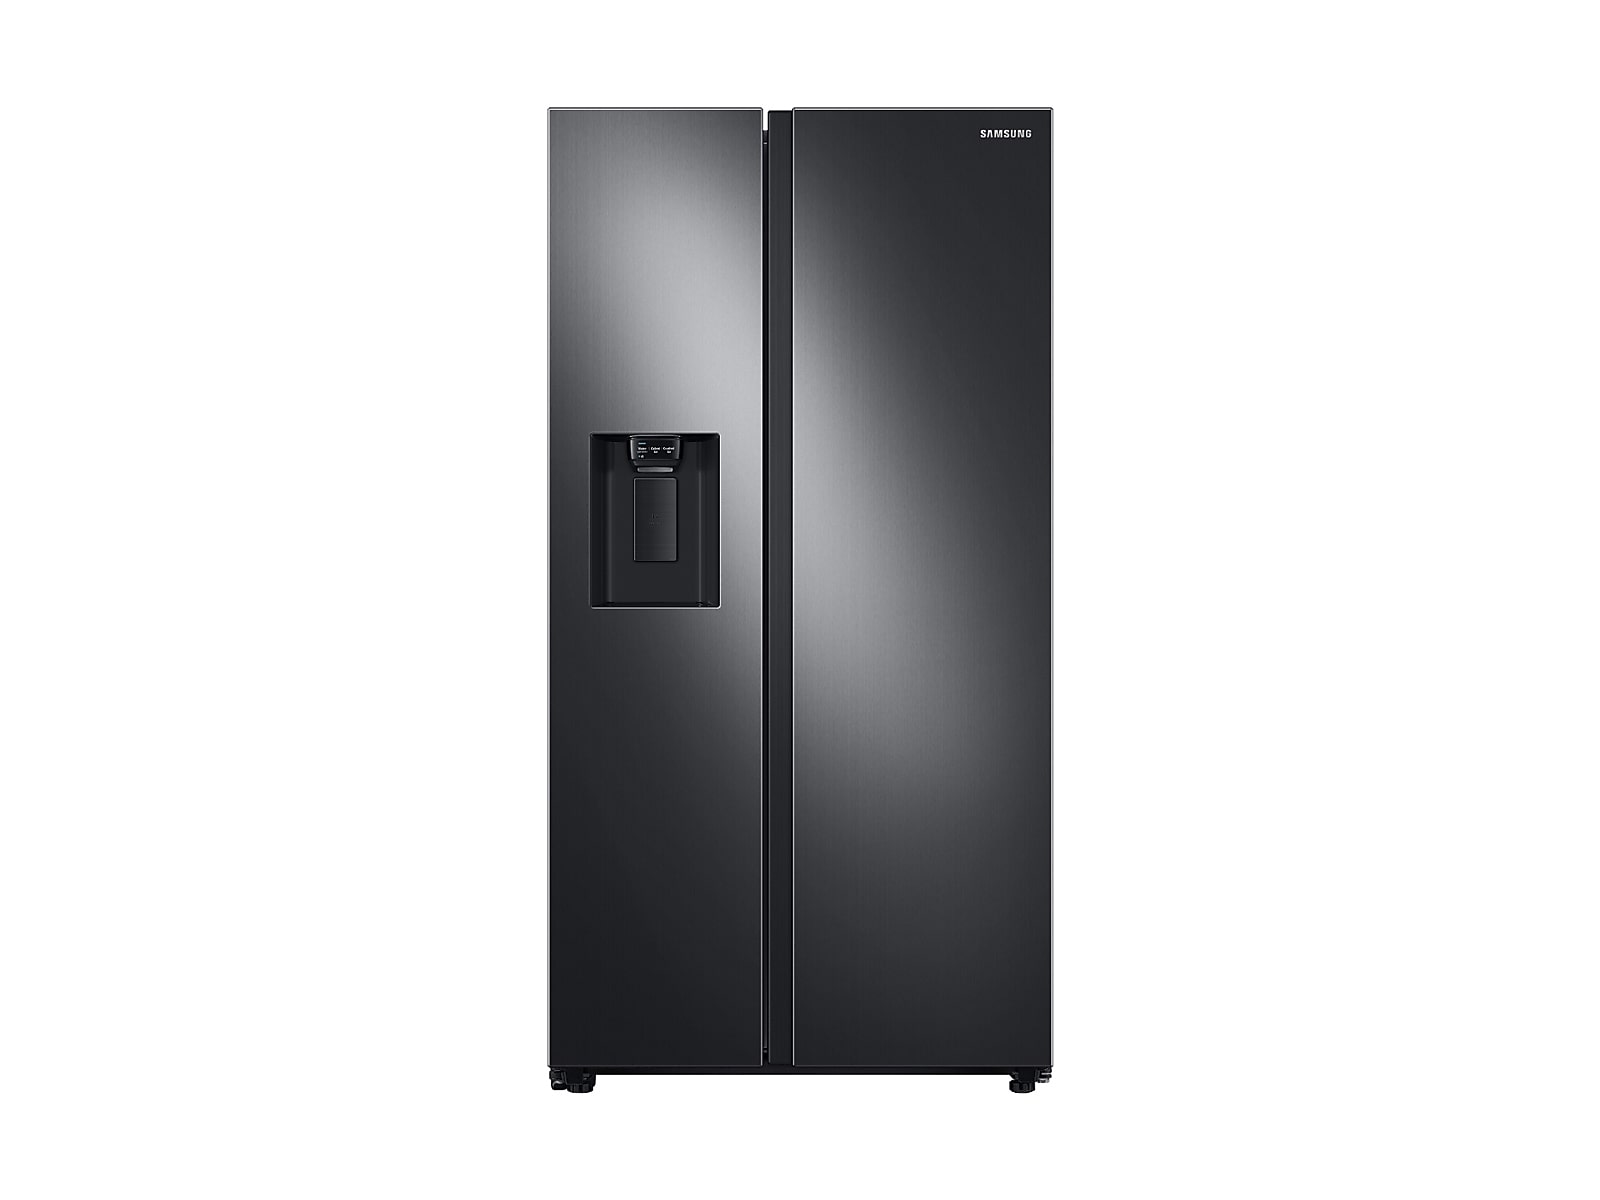 Samsung 22 cu. ft. Counter Depth Side-by-Side Refrigerator in Black Stainless Steel(RS22T5201SG/AA)